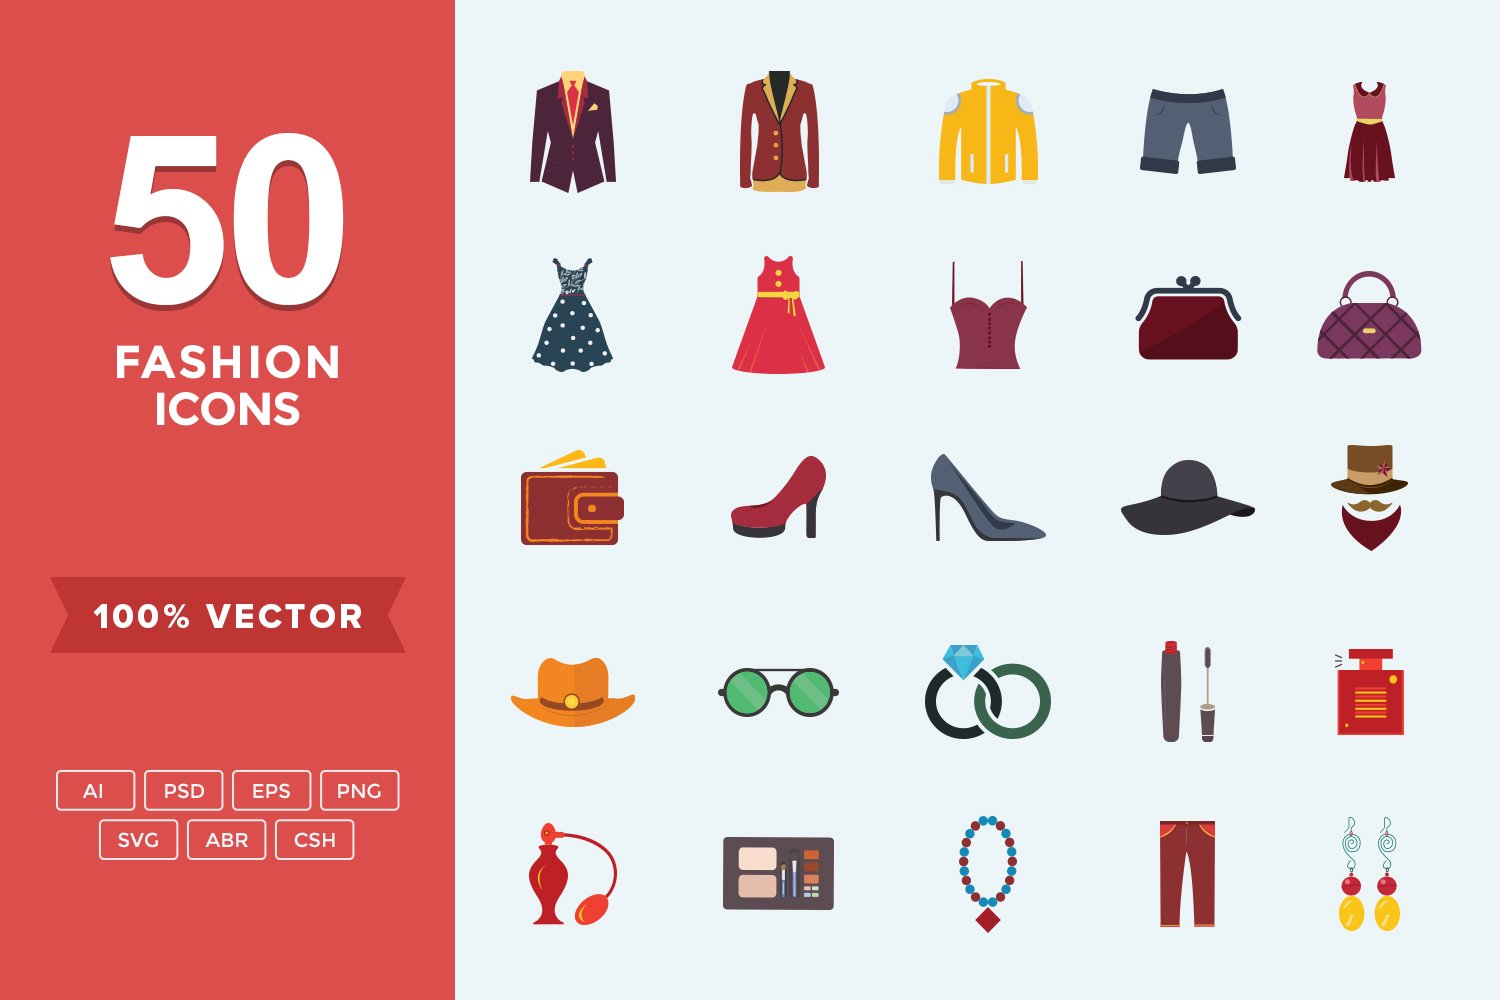 Flat Icons Fashion & Apparel cover image.